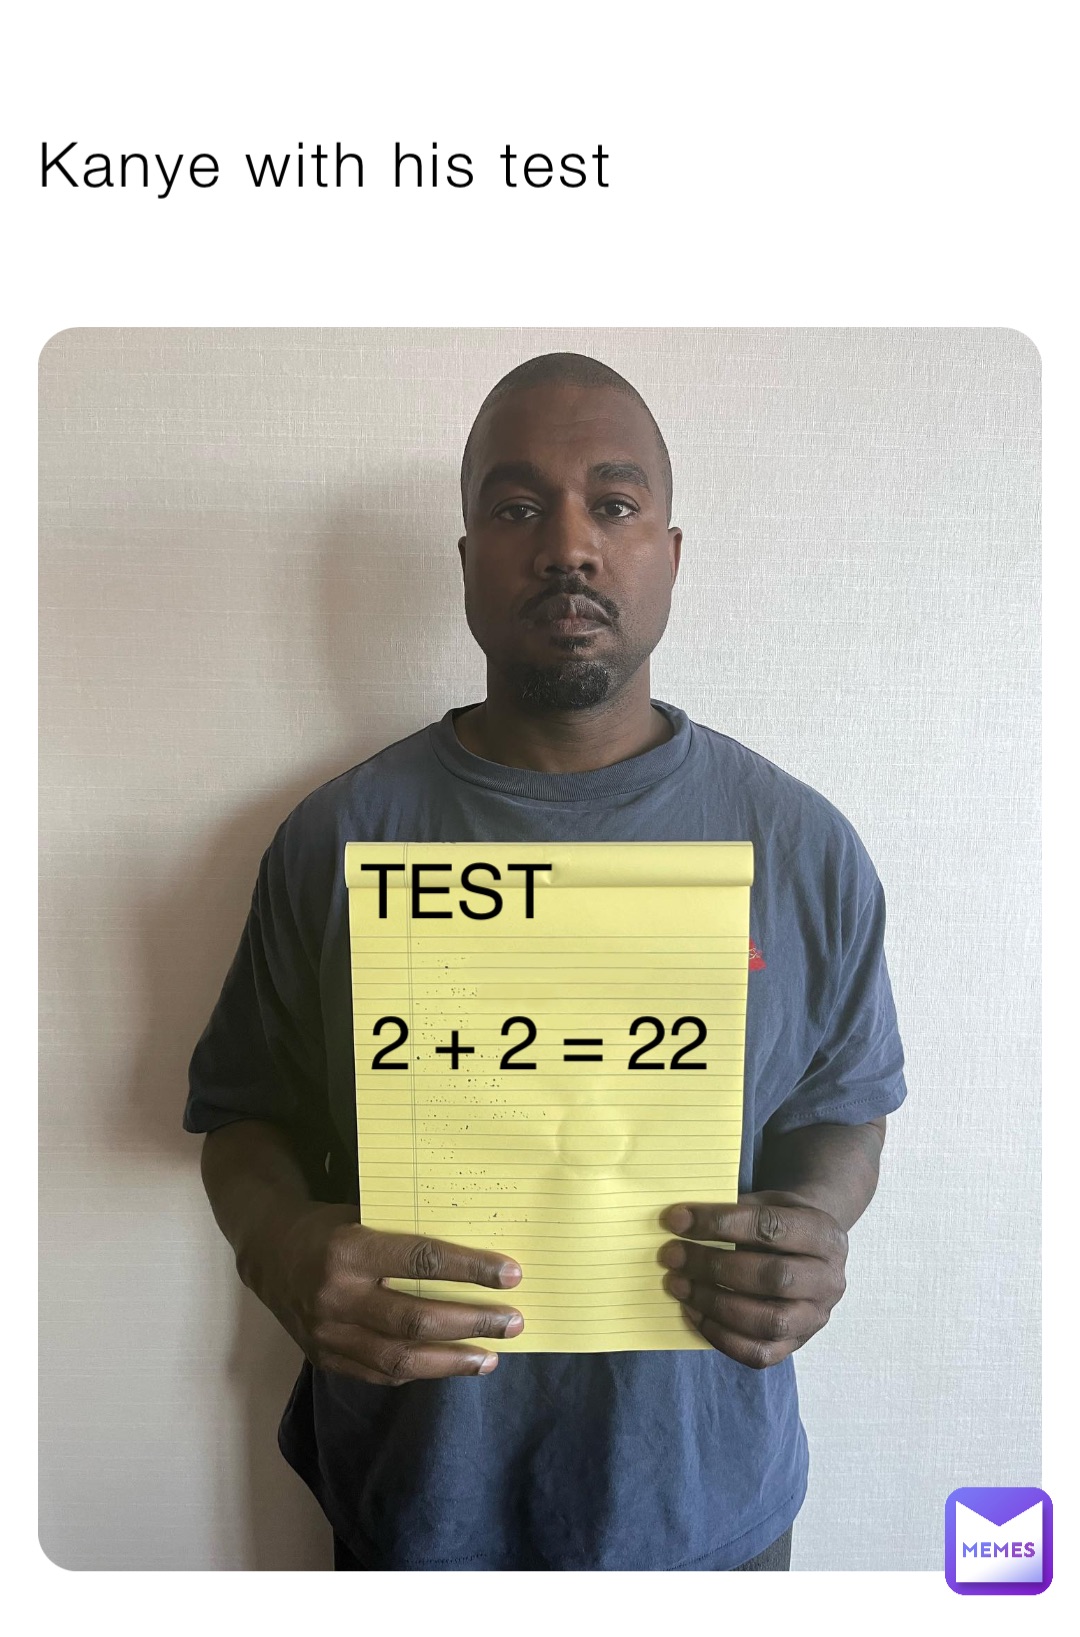 Kanye with his test TEST 2 + 2 = 22